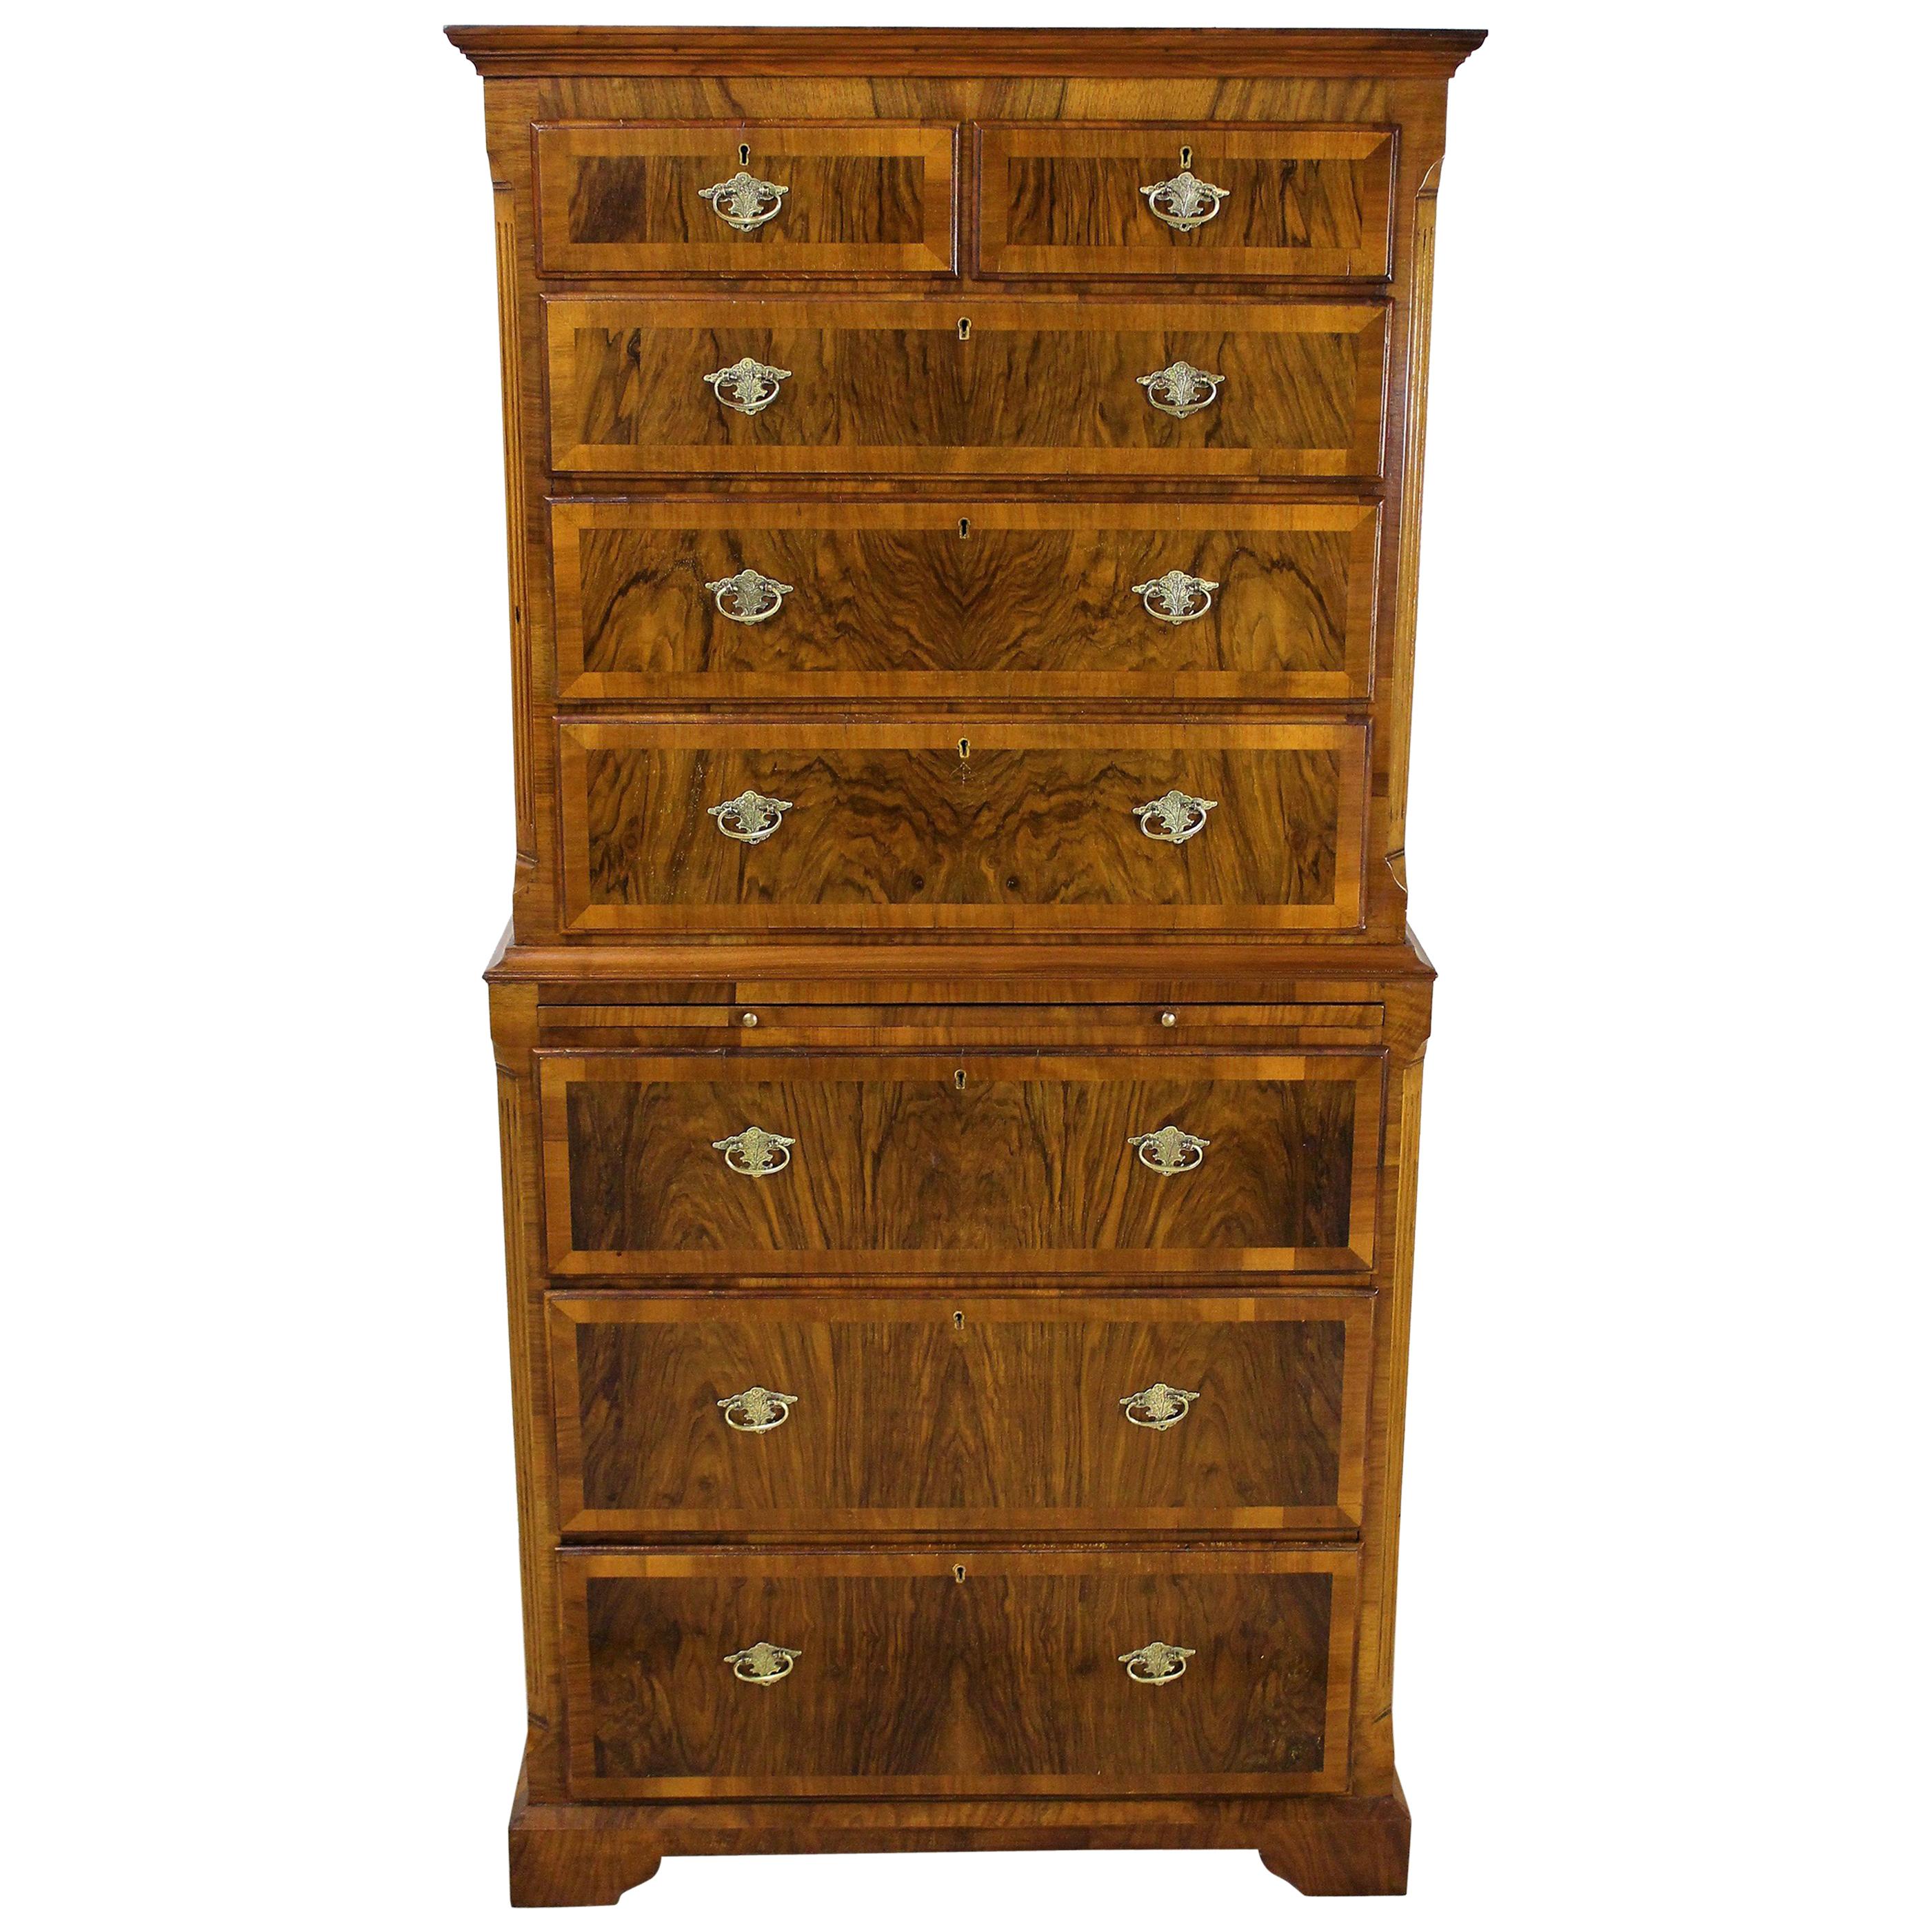 Early 20th Century Burr Walnut Chest on Chest